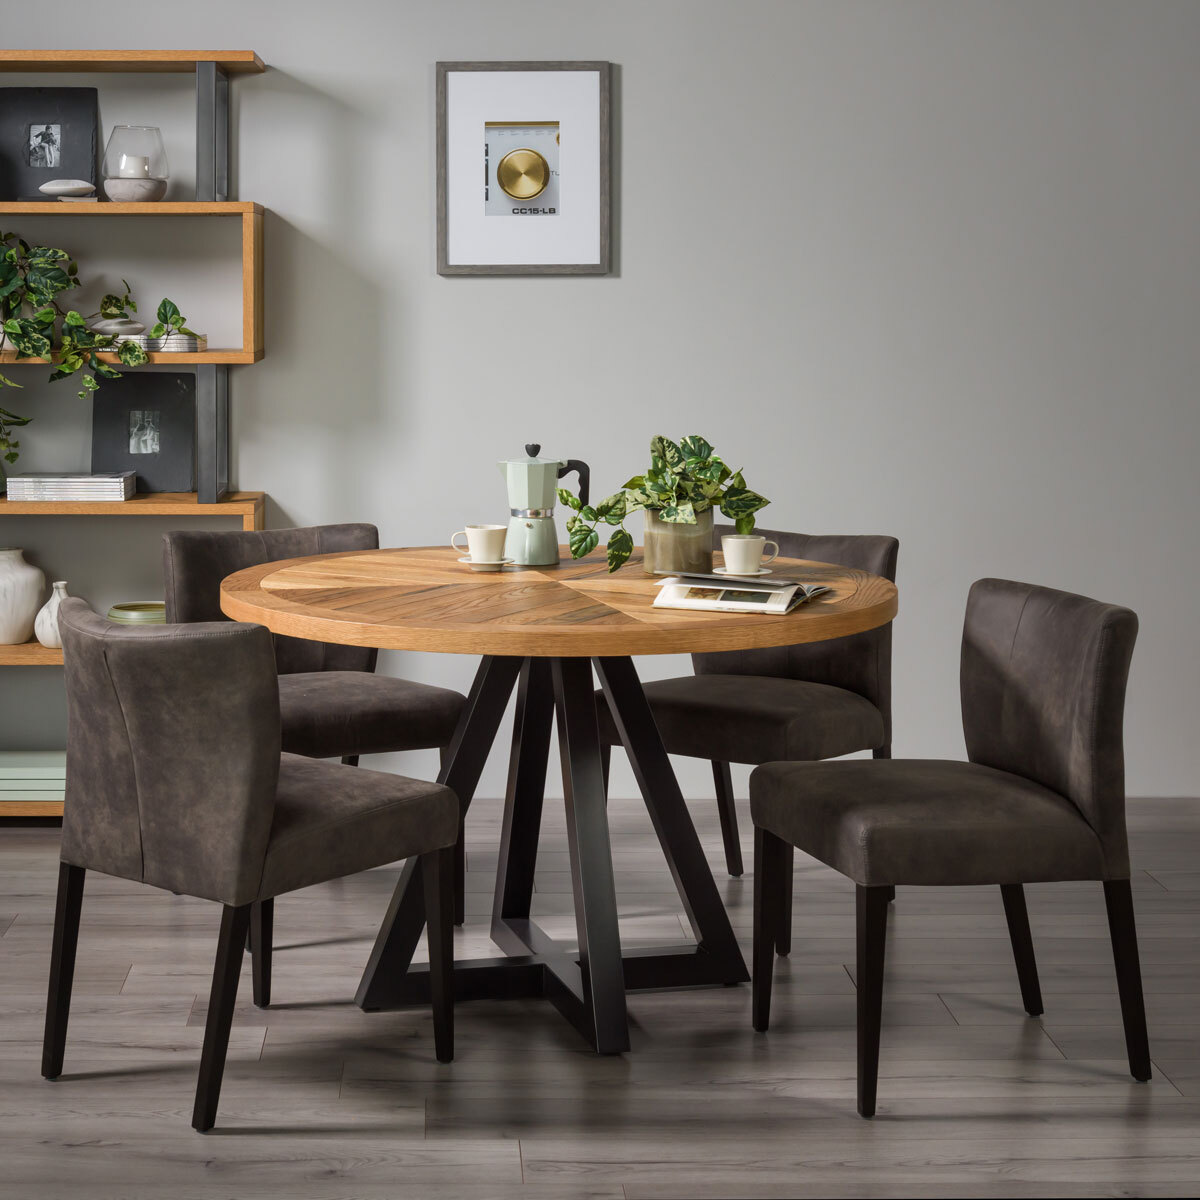 Chevron Rustic Oak Round Dining Table, Round Dining Table And 4 Chairs Uk